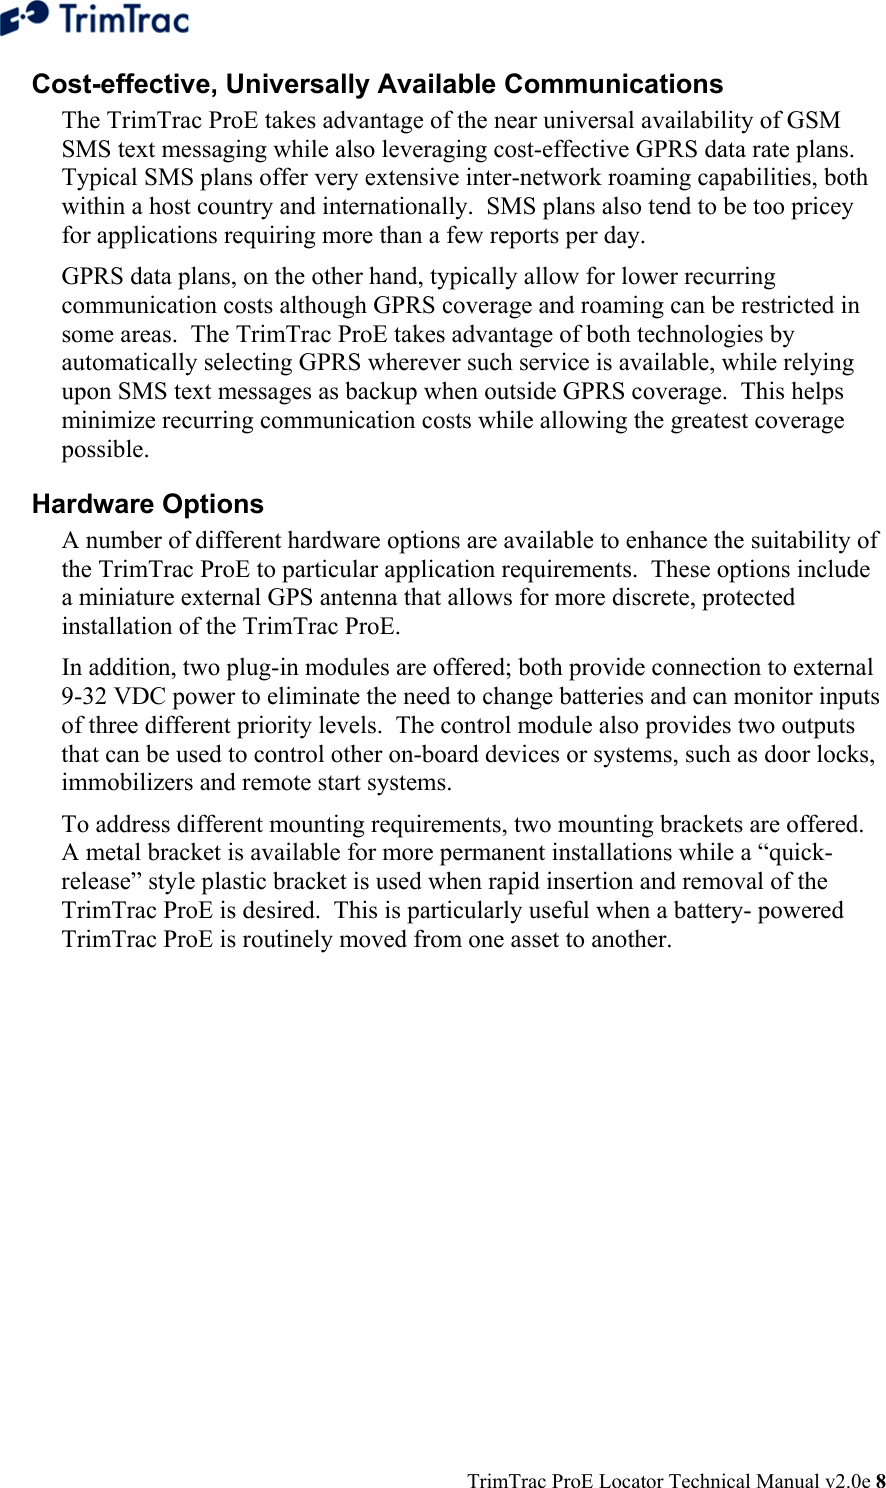  TrimTrac ProE Locator Technical Manual v2.0e 8 Cost-effective, Universally Available Communications The TrimTrac ProE takes advantage of the near universal availability of GSM SMS text messaging while also leveraging cost-effective GPRS data rate plans.  Typical SMS plans offer very extensive inter-network roaming capabilities, both within a host country and internationally.  SMS plans also tend to be too pricey for applications requiring more than a few reports per day.   GPRS data plans, on the other hand, typically allow for lower recurring communication costs although GPRS coverage and roaming can be restricted in some areas.  The TrimTrac ProE takes advantage of both technologies by automatically selecting GPRS wherever such service is available, while relying upon SMS text messages as backup when outside GPRS coverage.  This helps minimize recurring communication costs while allowing the greatest coverage possible.   Hardware Options A number of different hardware options are available to enhance the suitability of the TrimTrac ProE to particular application requirements.  These options include a miniature external GPS antenna that allows for more discrete, protected installation of the TrimTrac ProE. In addition, two plug-in modules are offered; both provide connection to external 9-32 VDC power to eliminate the need to change batteries and can monitor inputs of three different priority levels.  The control module also provides two outputs that can be used to control other on-board devices or systems, such as door locks, immobilizers and remote start systems. To address different mounting requirements, two mounting brackets are offered.  A metal bracket is available for more permanent installations while a “quick-release” style plastic bracket is used when rapid insertion and removal of the TrimTrac ProE is desired.  This is particularly useful when a battery- powered TrimTrac ProE is routinely moved from one asset to another. 